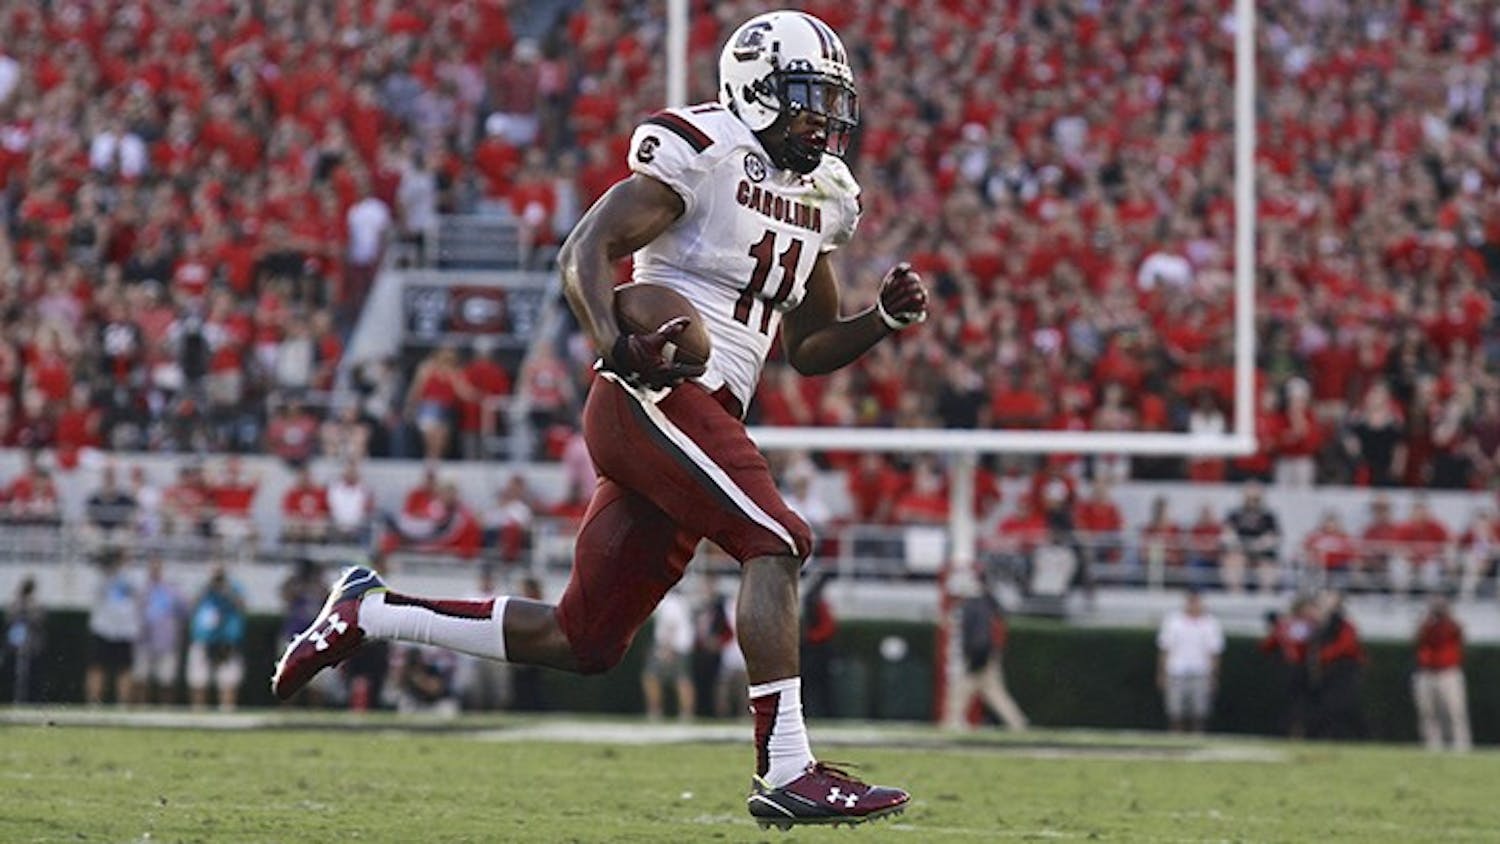 The Gamecocks had a total of 445 yards for a season high against Texas A&amp;M.